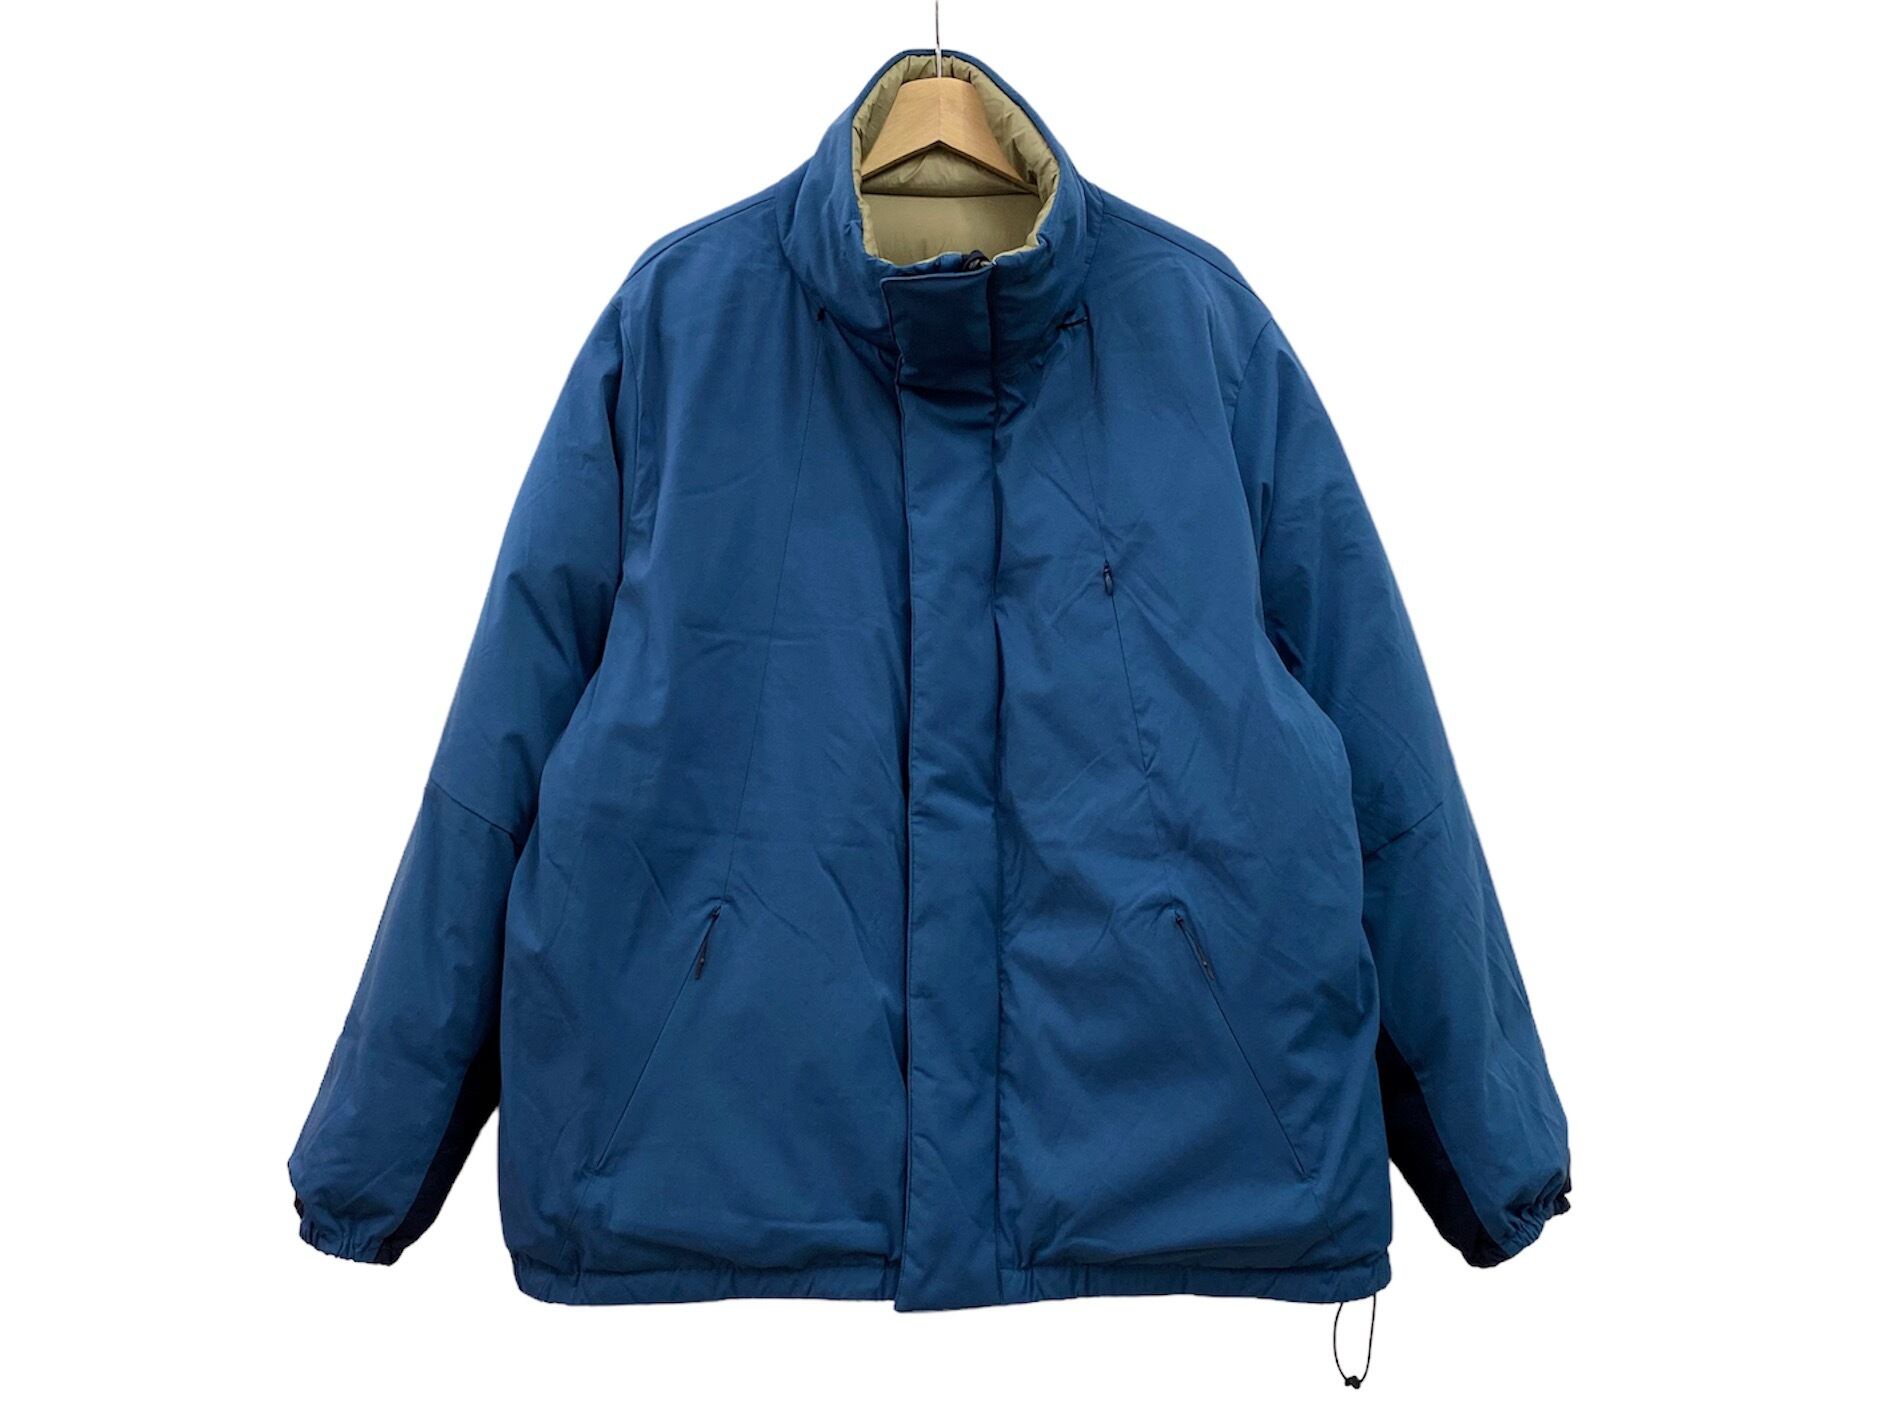 Si×TAION】Reversible Down Blouson (emerald blue) | 101 clothing store